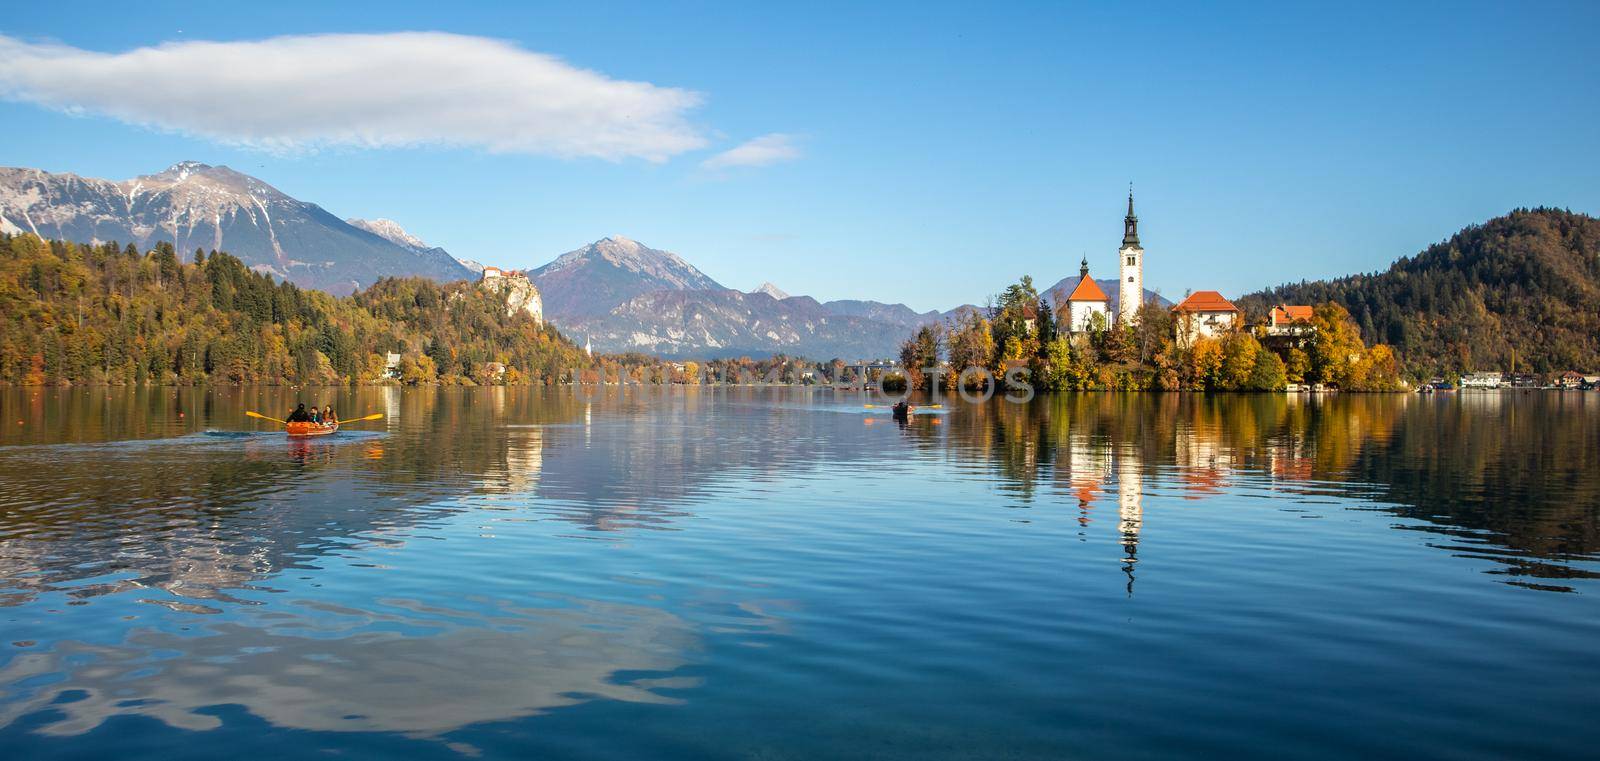 Panoramic view of Julian Alps, Lake Bled with St. Marys Church of the Assumption on the small island. Bled, Slovenia, Europe